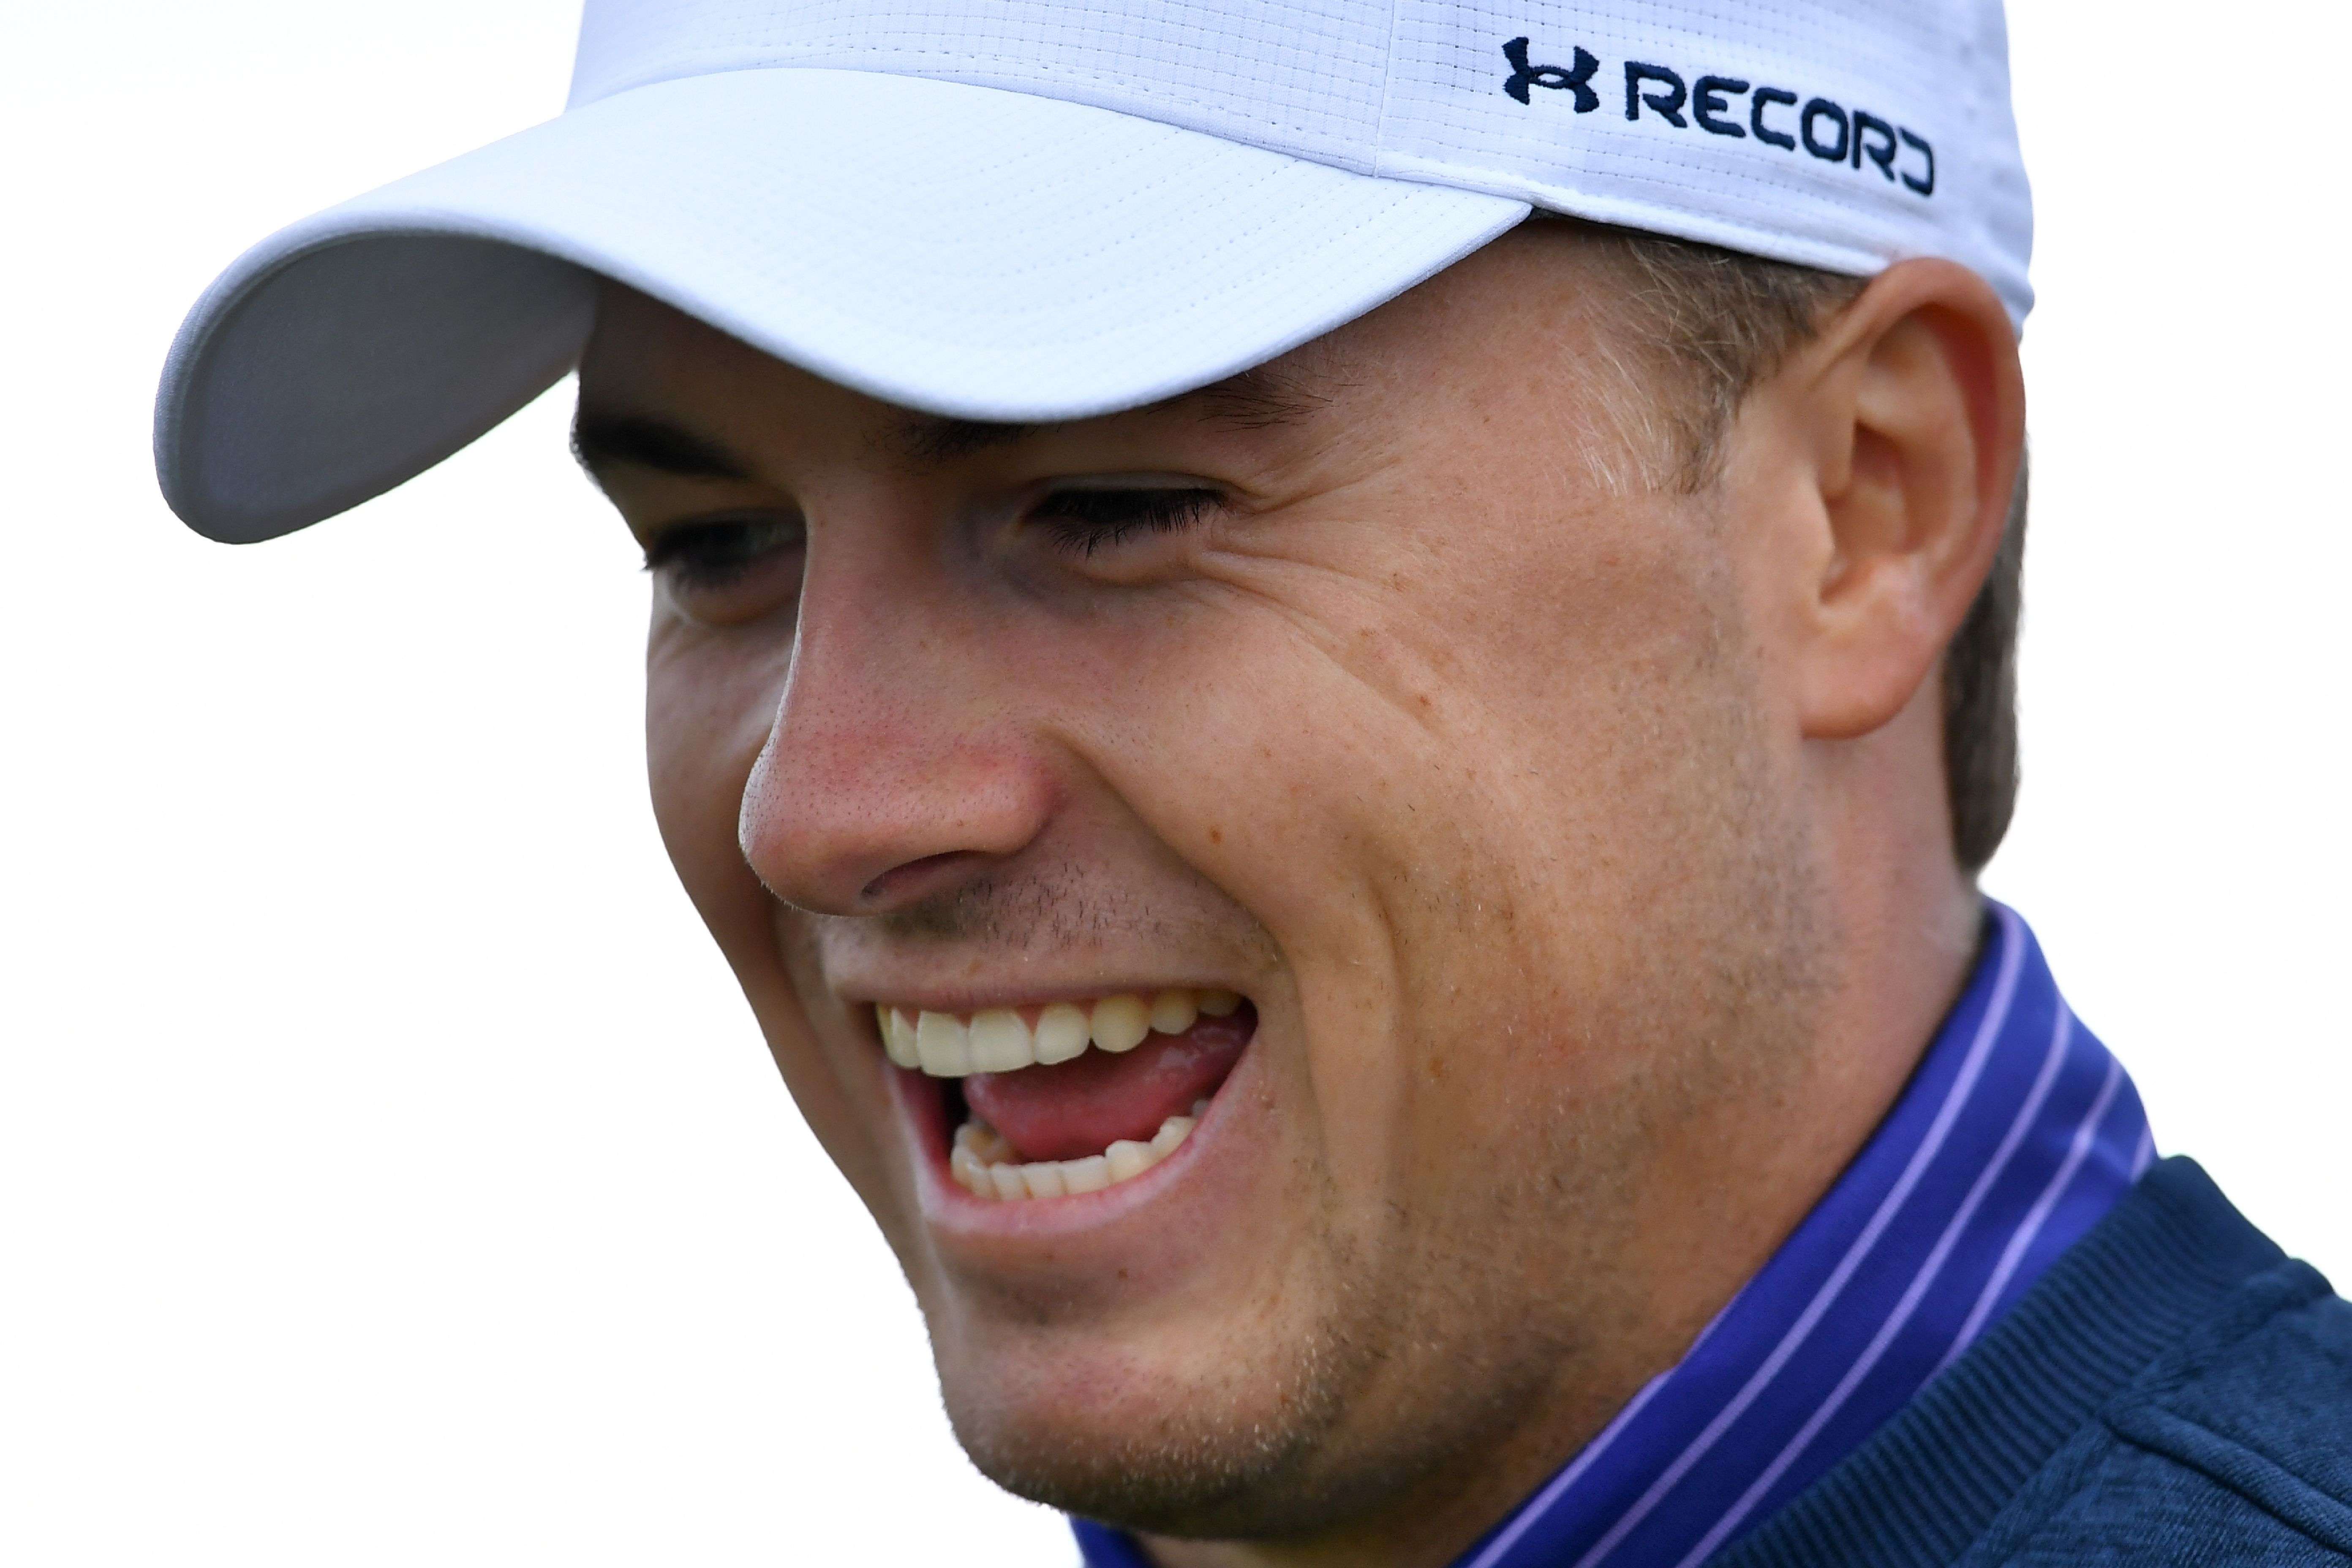 US golfer Jordan Spieth smiles as he leaves the 4th tee during practice on July 11, 2016, ahead of the 2016 British Open Golf Championship at Royal Troon in Scotland. AFP PHOTO / BEN STANSALL / RESTRICTED TO EDITORIAL USE